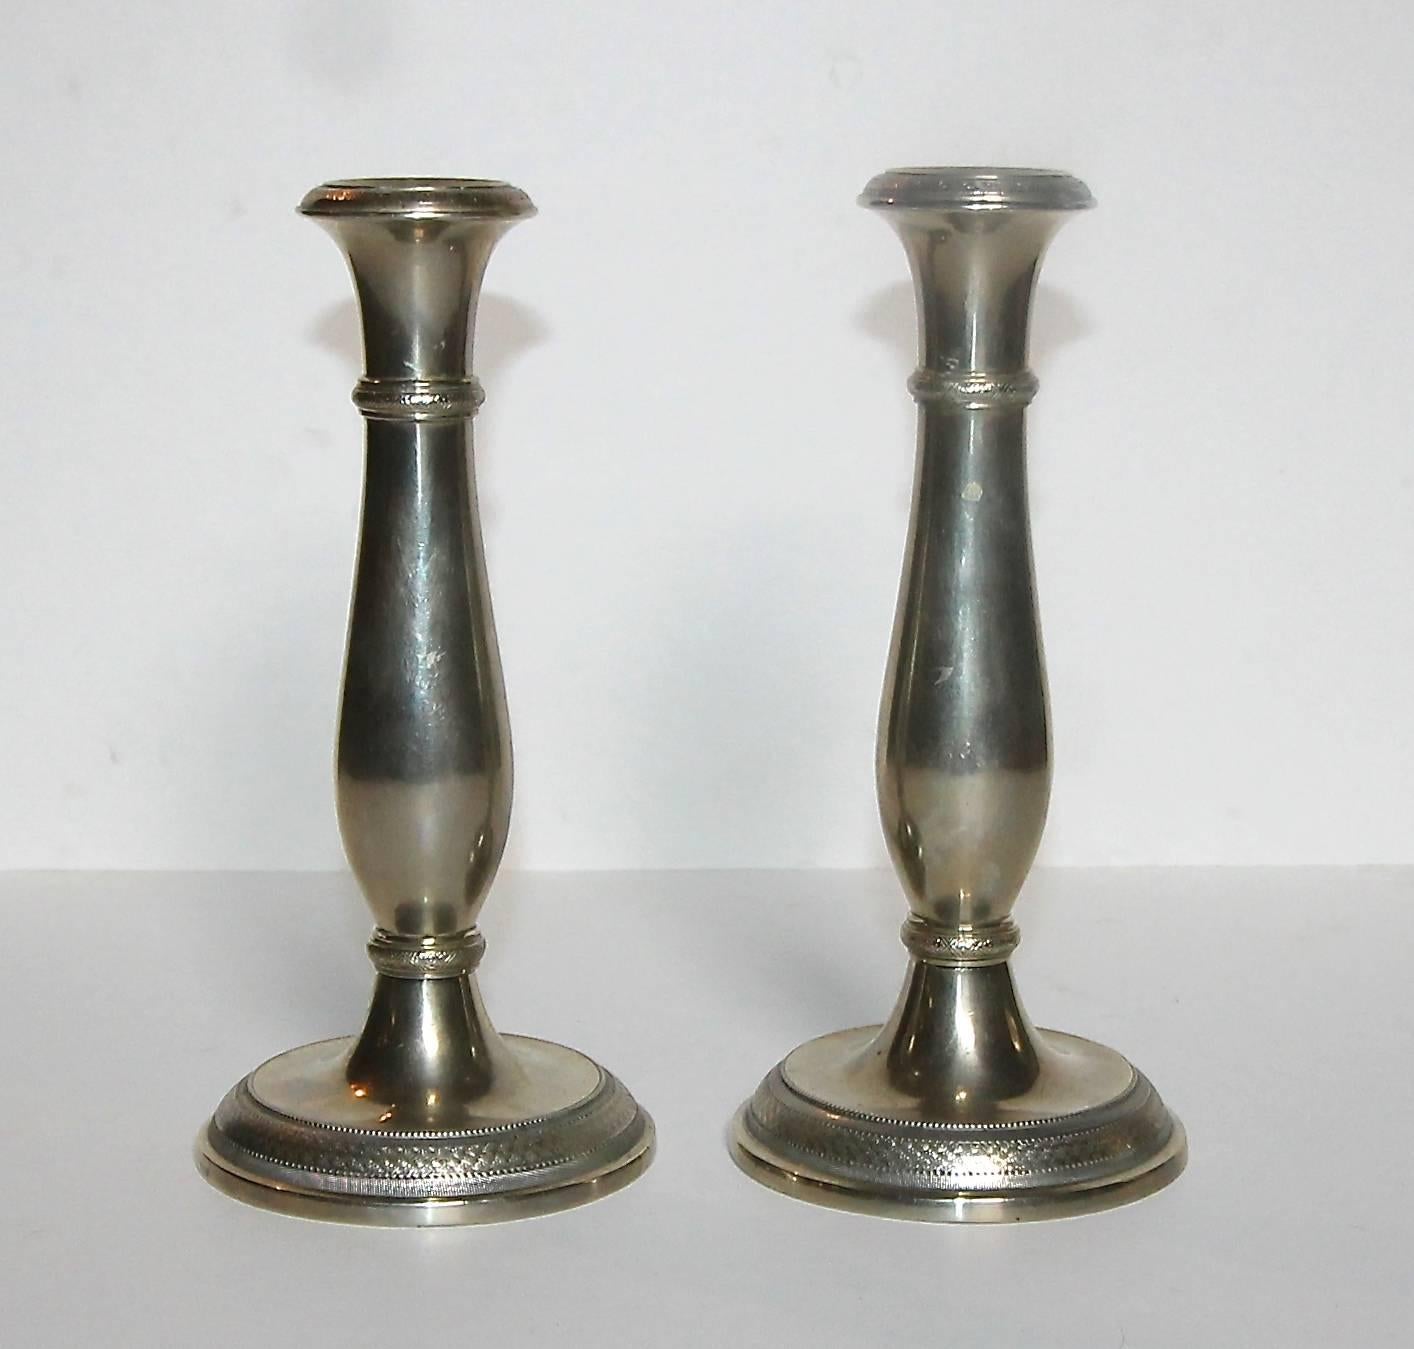 Rare pair of 2nd Empire Austrian candlesticks by Berndorf Metalware Factory (BMF) in nickel silver. Stamped at each base with two-headed eagle (Austrian-Hungarian Empire coat of arms) and BMF. Finely chased. Nickel silver has a more silver color